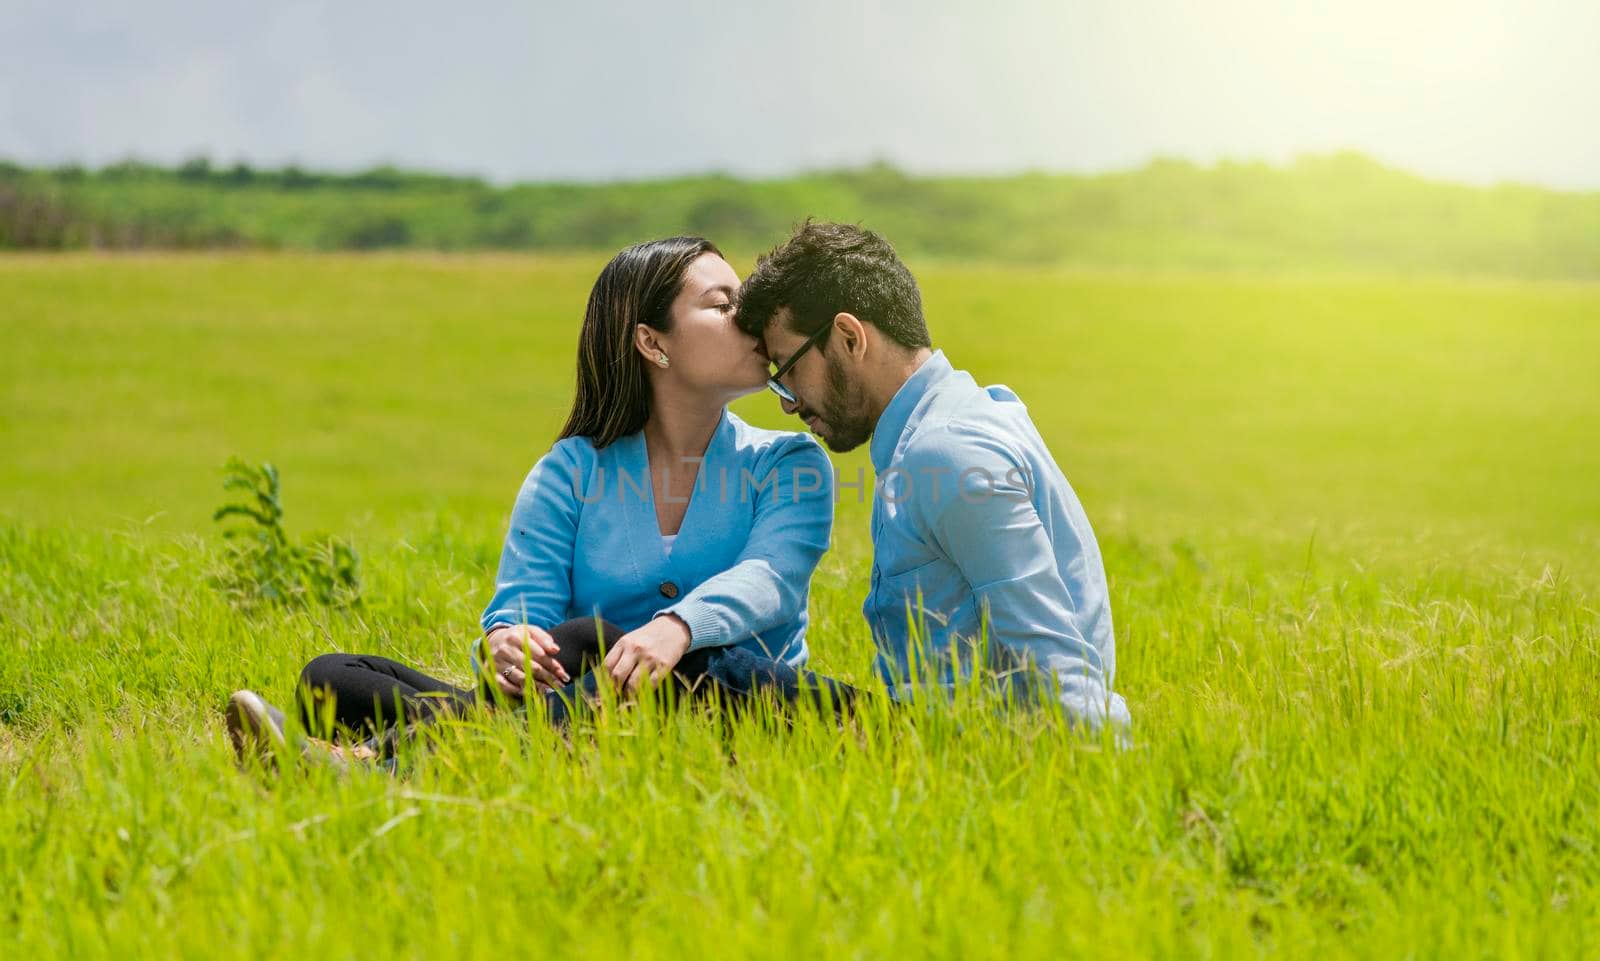 Romantic couple sitting on the grass kissing their foreheads, A pretty girl kissing her boyfriend's forehead in the field, A couple in love sitting on the field kissing their foreheads by isaiphoto